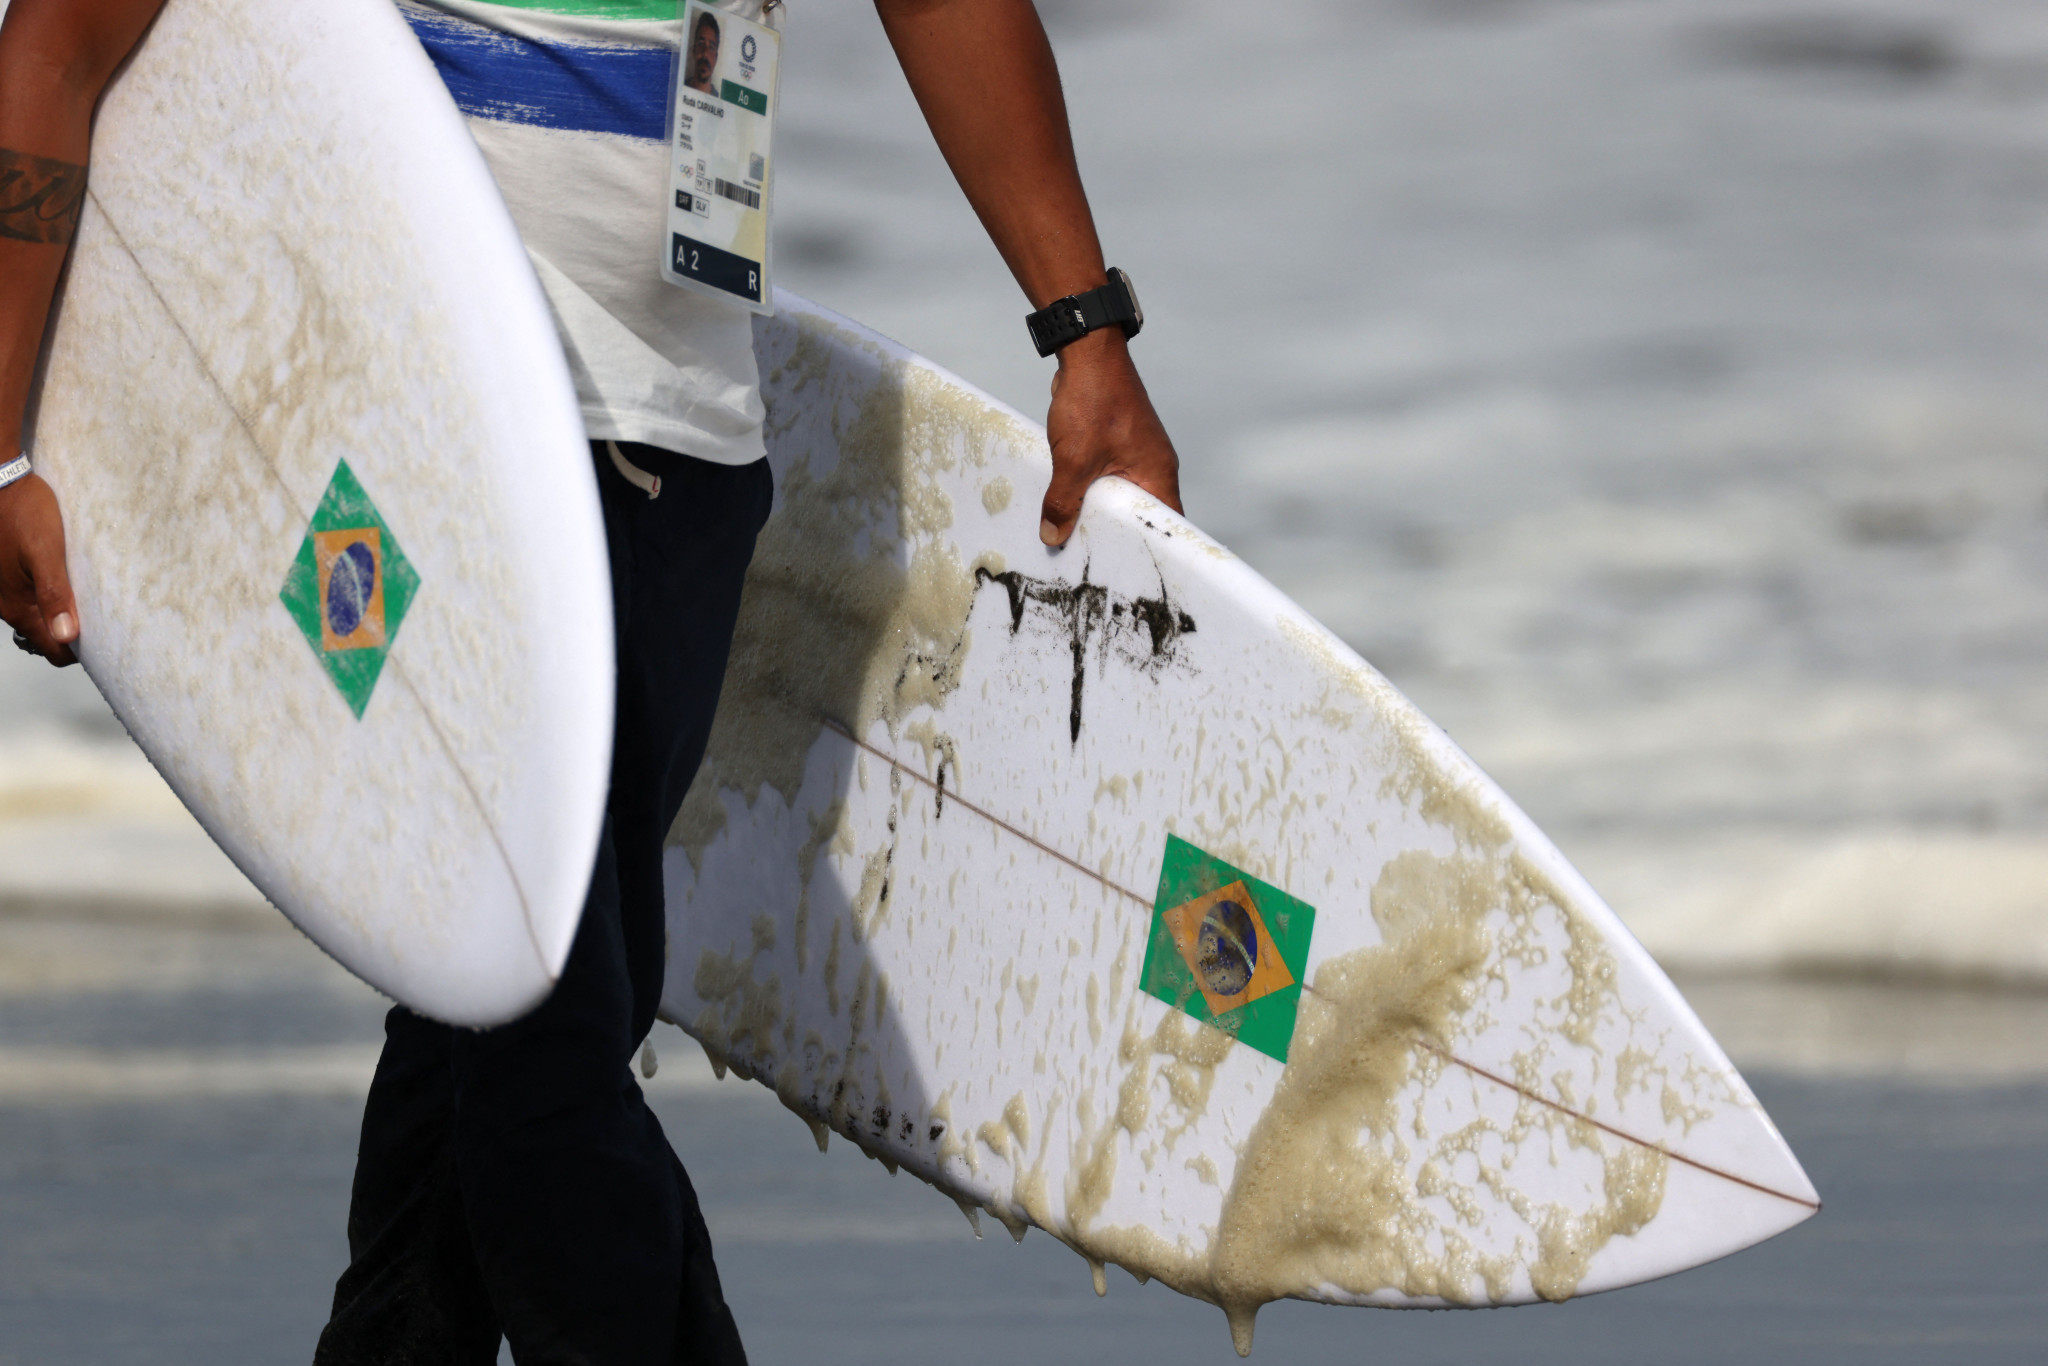 Italo Ferreira's broken surfboard from the Tokyo 2020 Olympics is among the items on display ©Getty Images